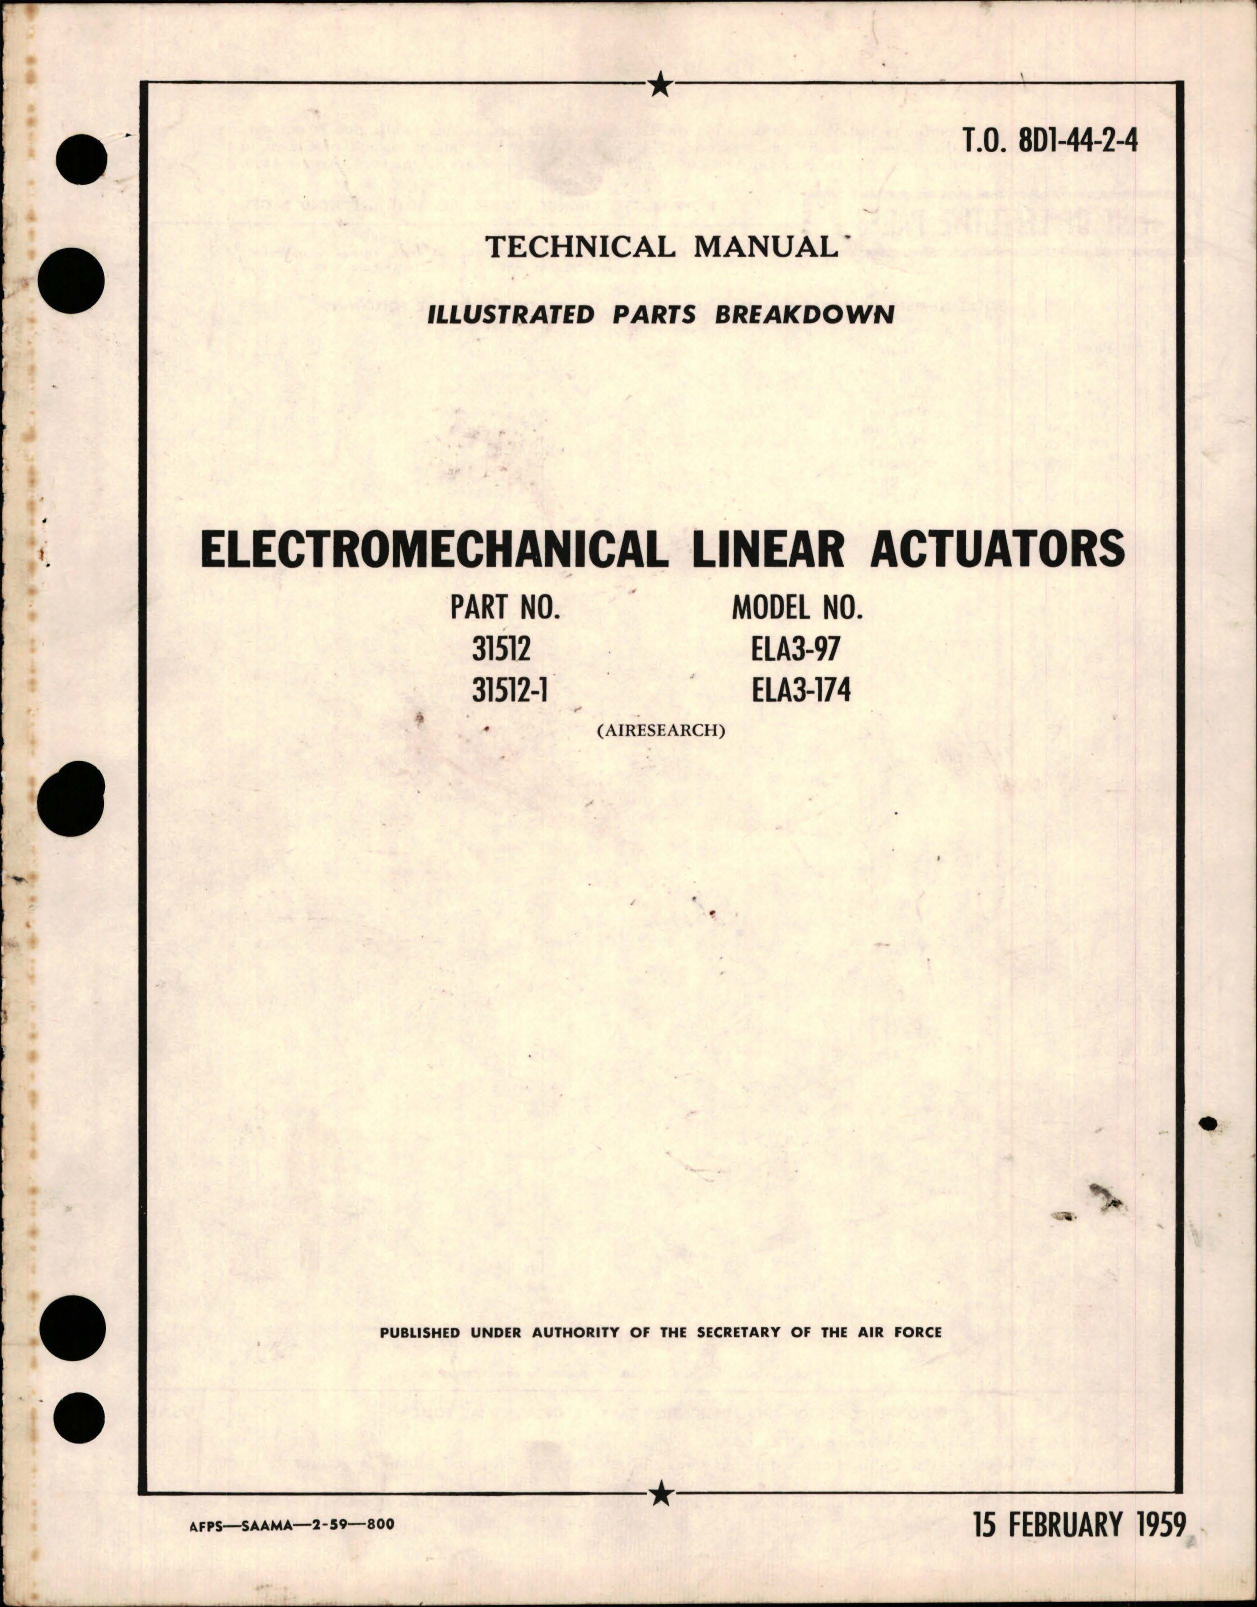 Sample page 1 from AirCorps Library document: Illustrated Parts Breakdown for Electromechanical Linear Actuators - Parts 31512 and 31512-1 - Models ELA3-97 and ELA3-174